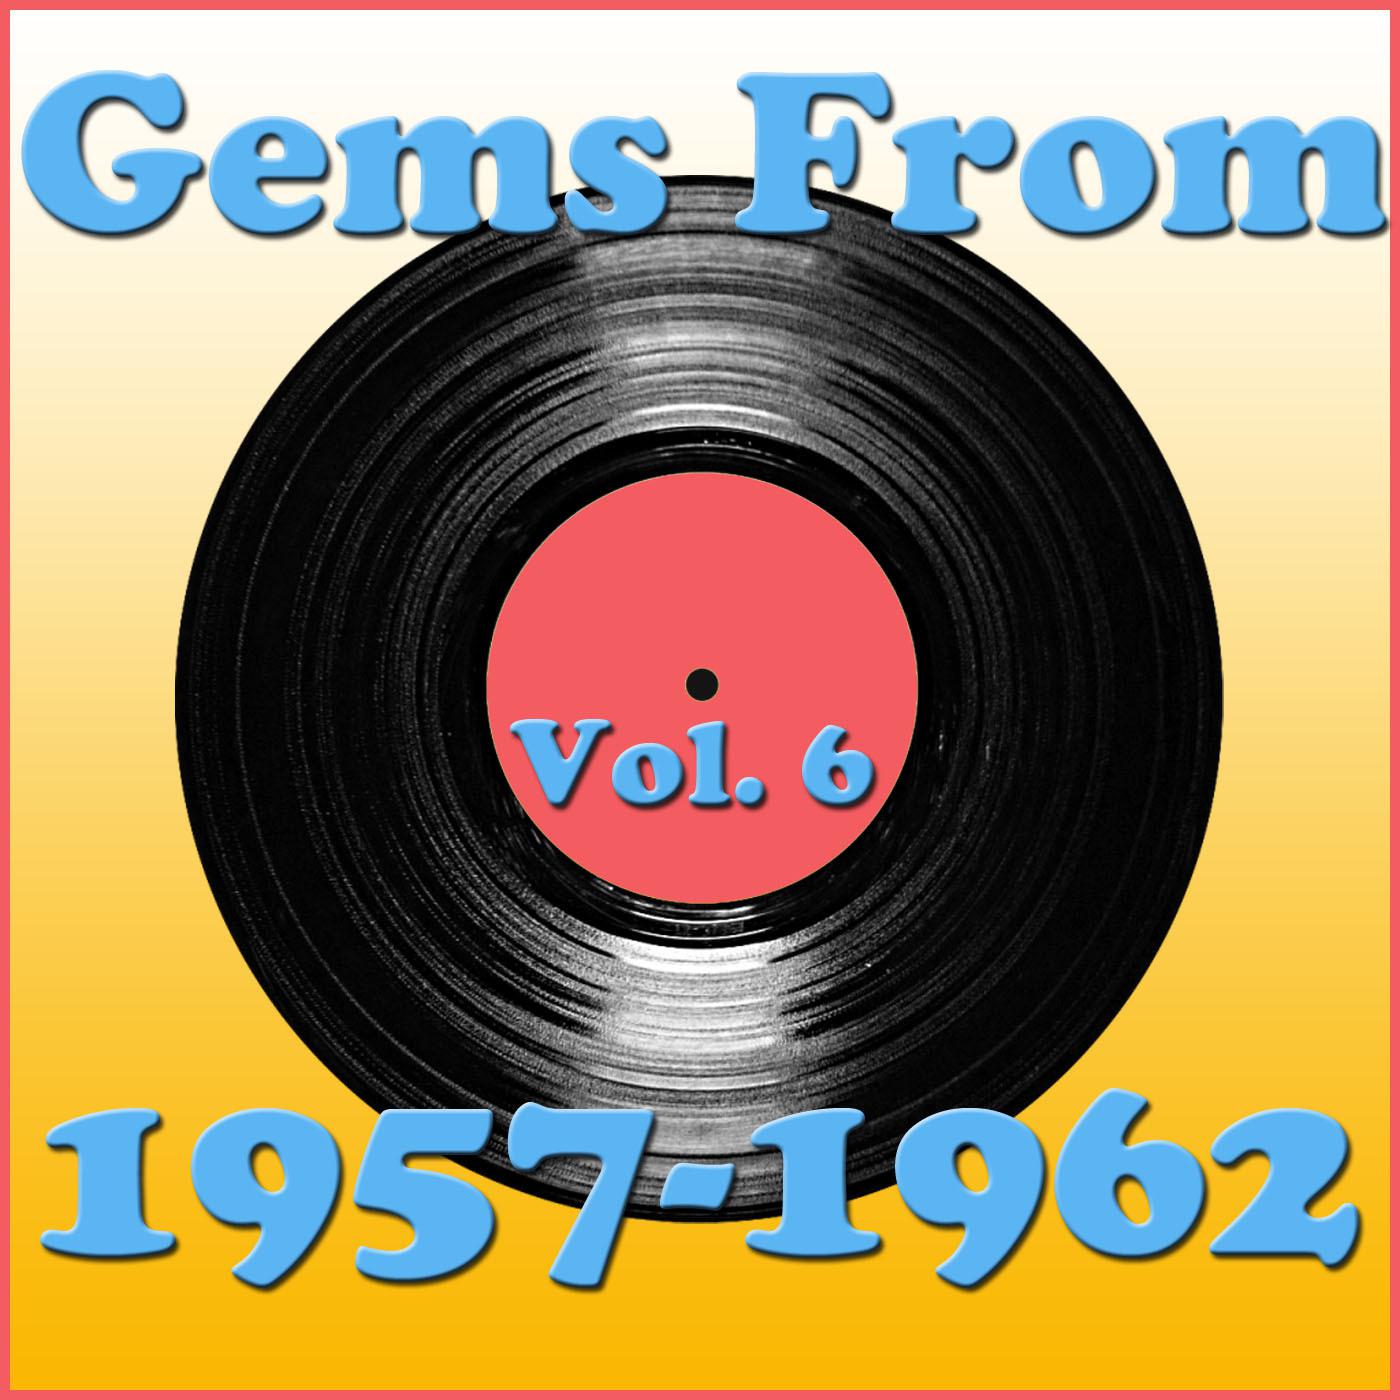 Gems From 1957-1962, Vol. 6